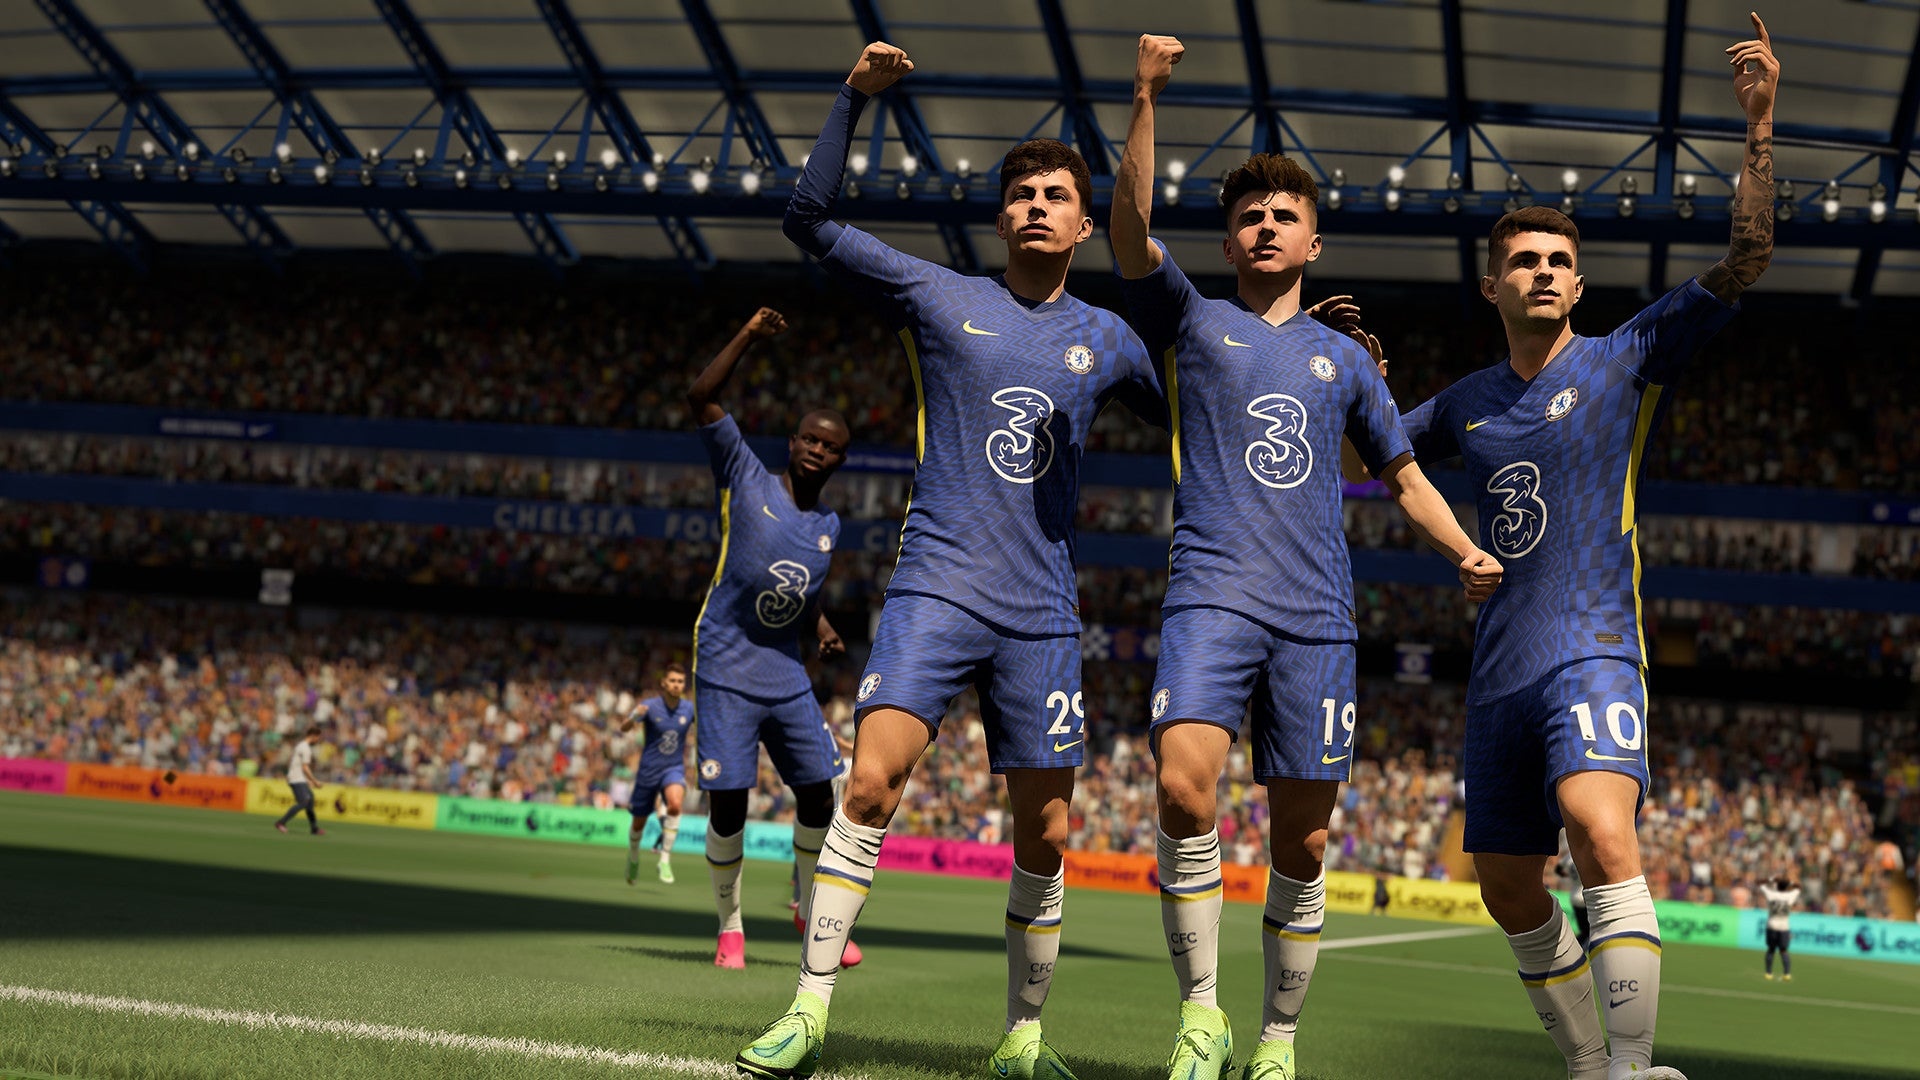 FIFA Soccer (Game): EA Sports 22 Legacy Edition, Nintendo Switch, Features the latest kits, clubs, and squads. 1920x1080 Full HD Wallpaper.